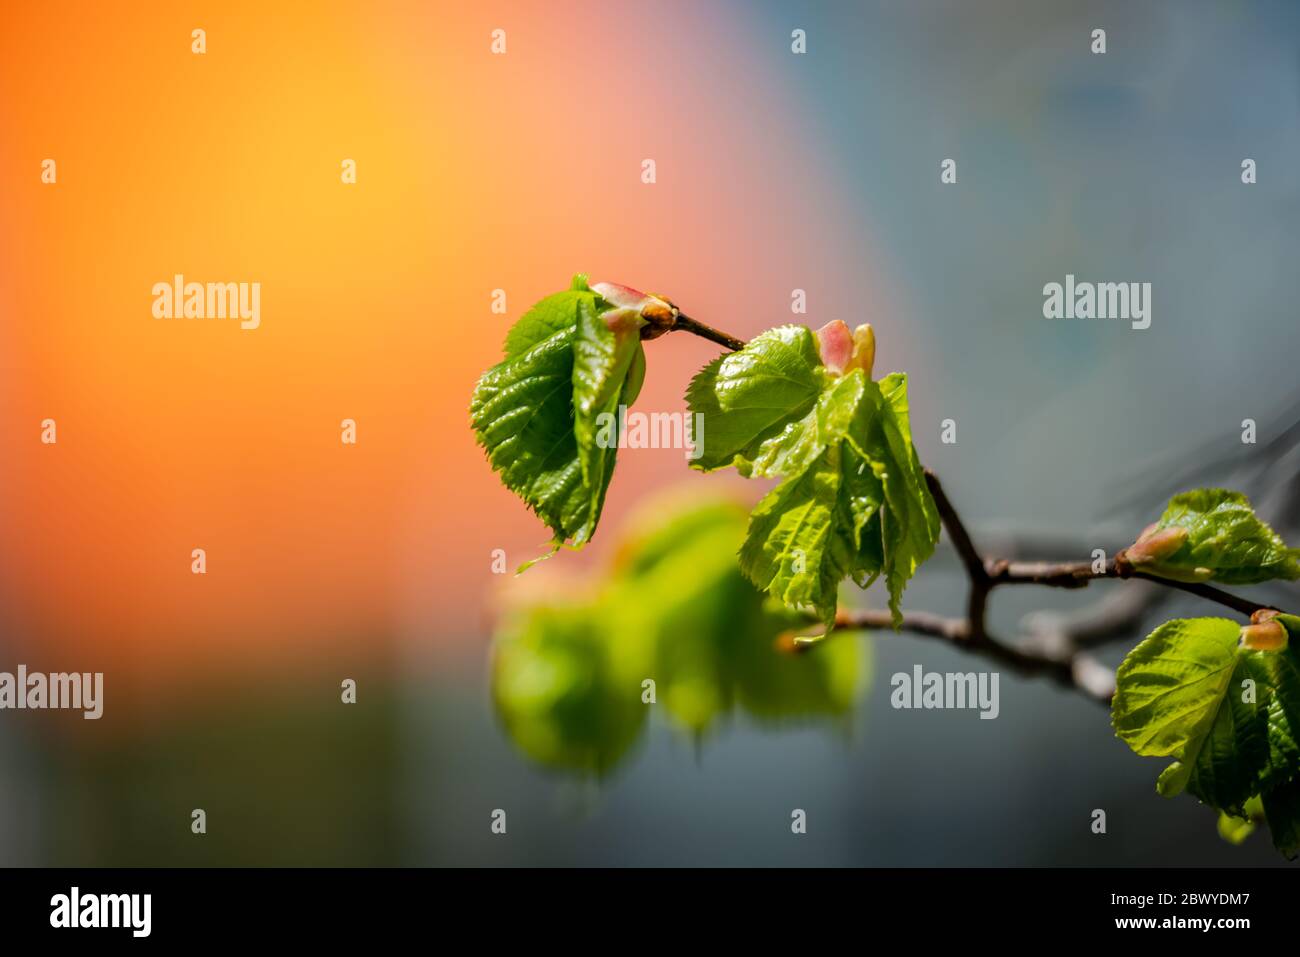 Linden tree leaves in the springtime Stock Photo